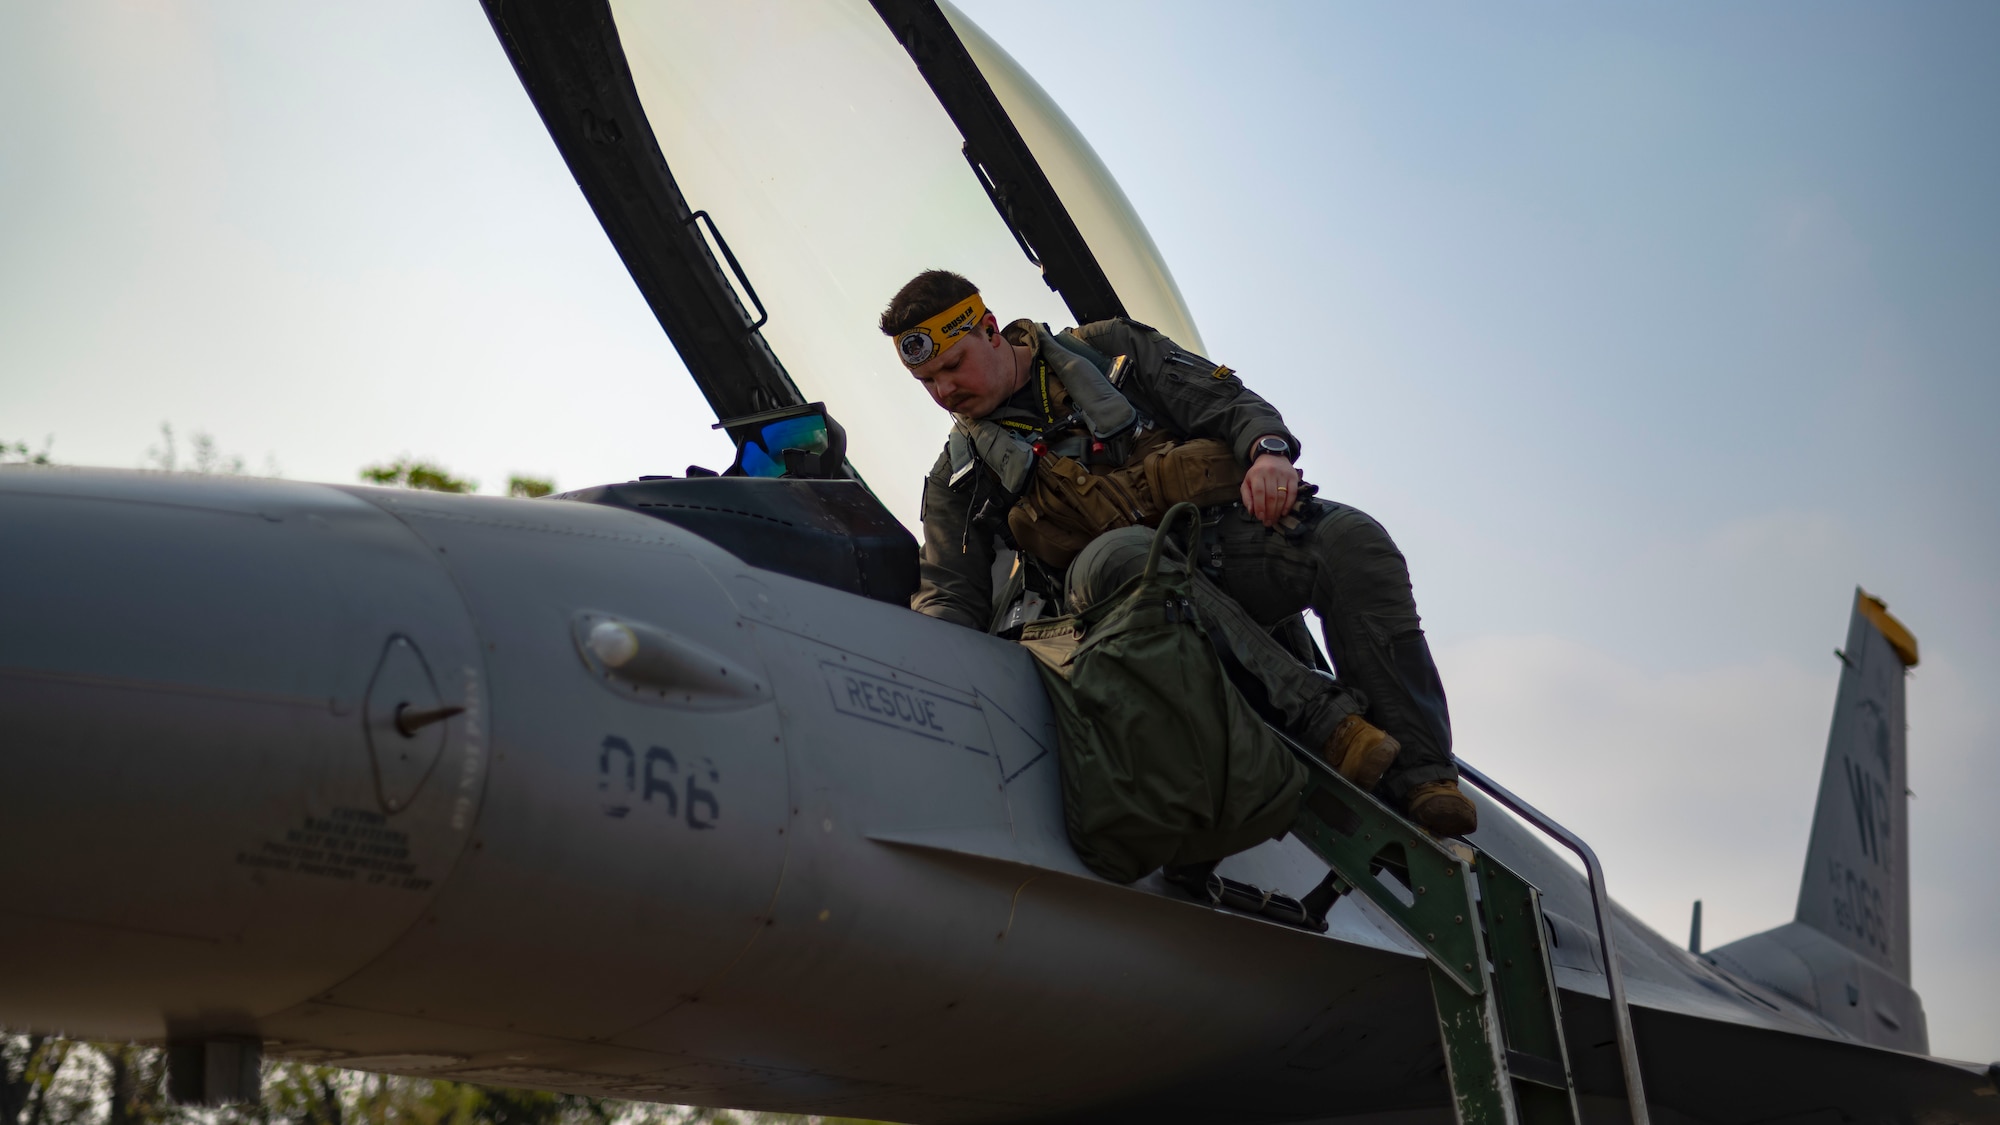 An F-16 Fighting Falcon pilot, boards an aircraft to lead U.S. Air Force integration into an amphibious assault scenario